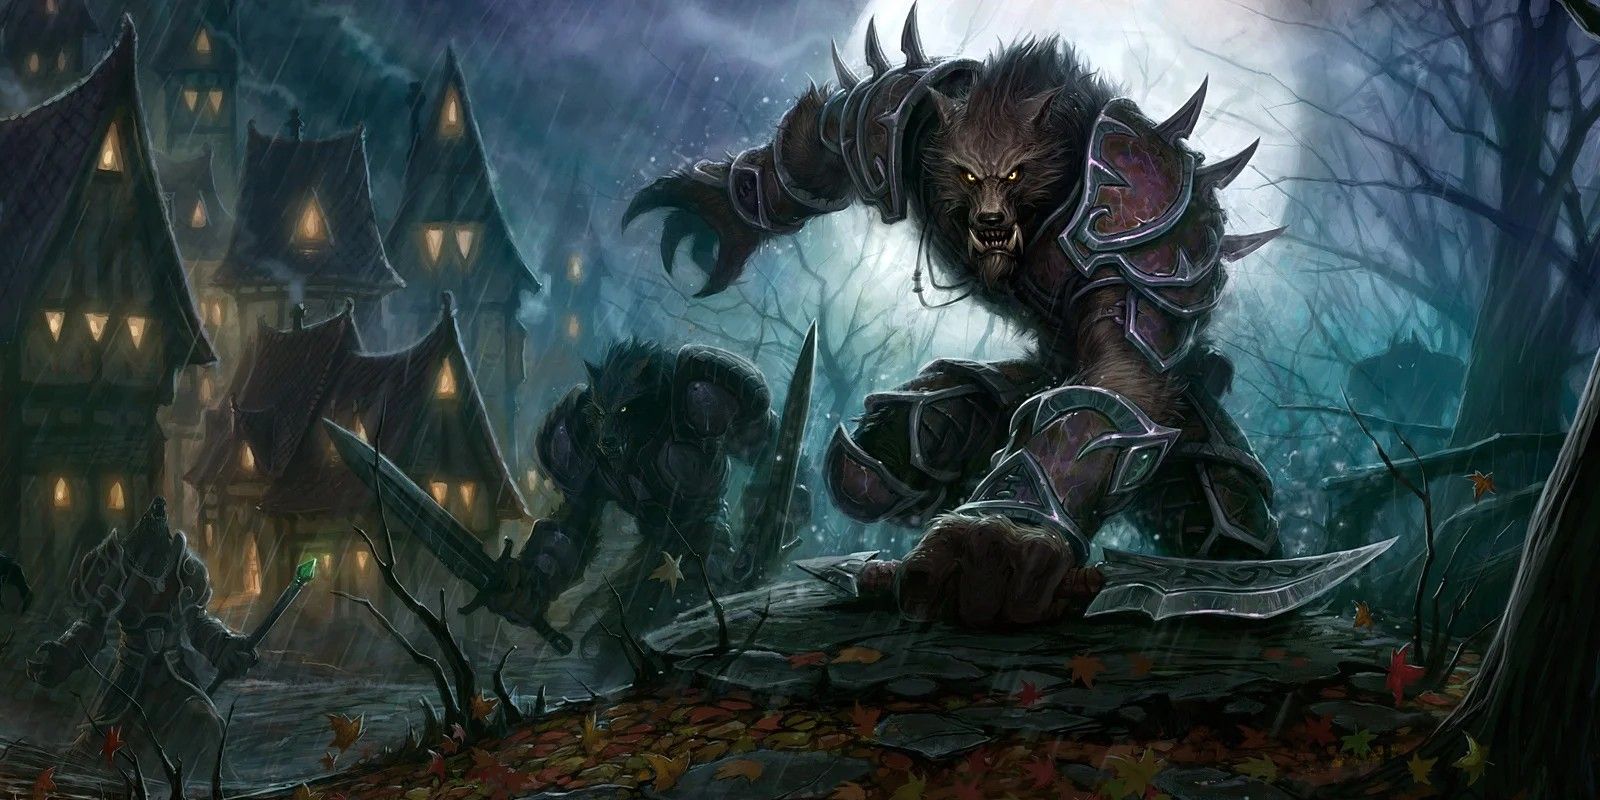 The Lore of World of Warcraft: Cataclysm